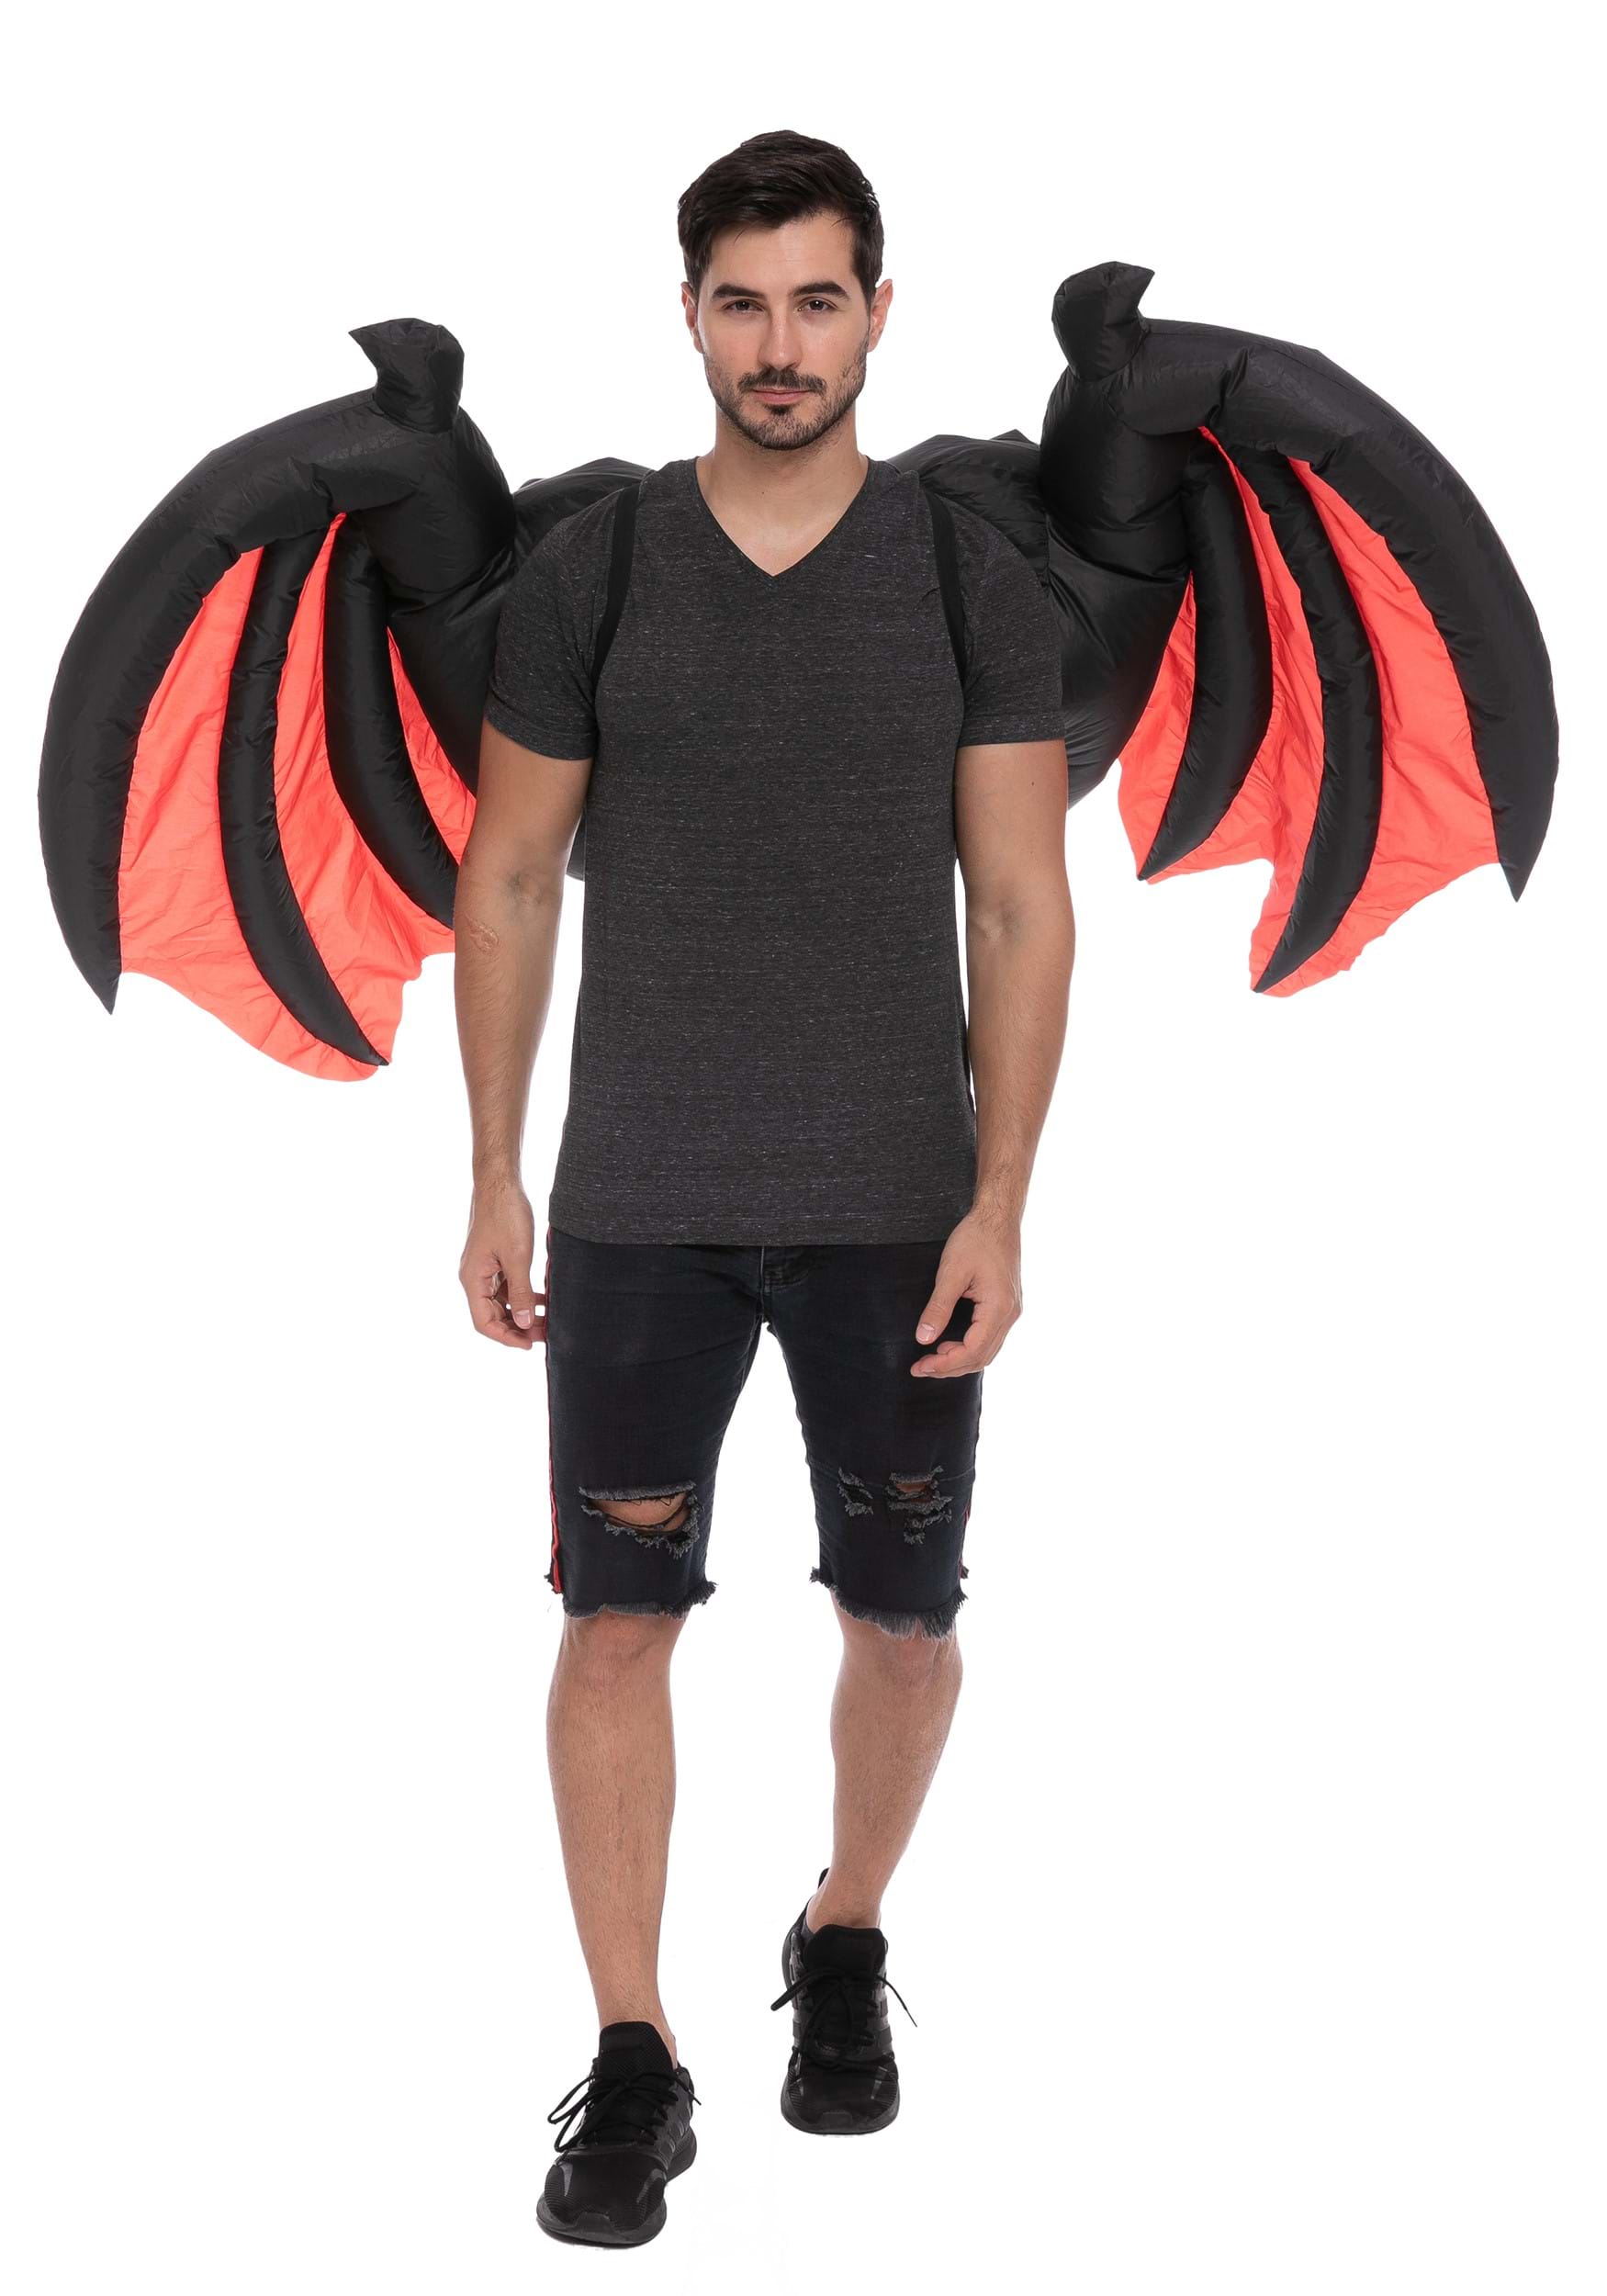 Inflatable Back Demon Wings